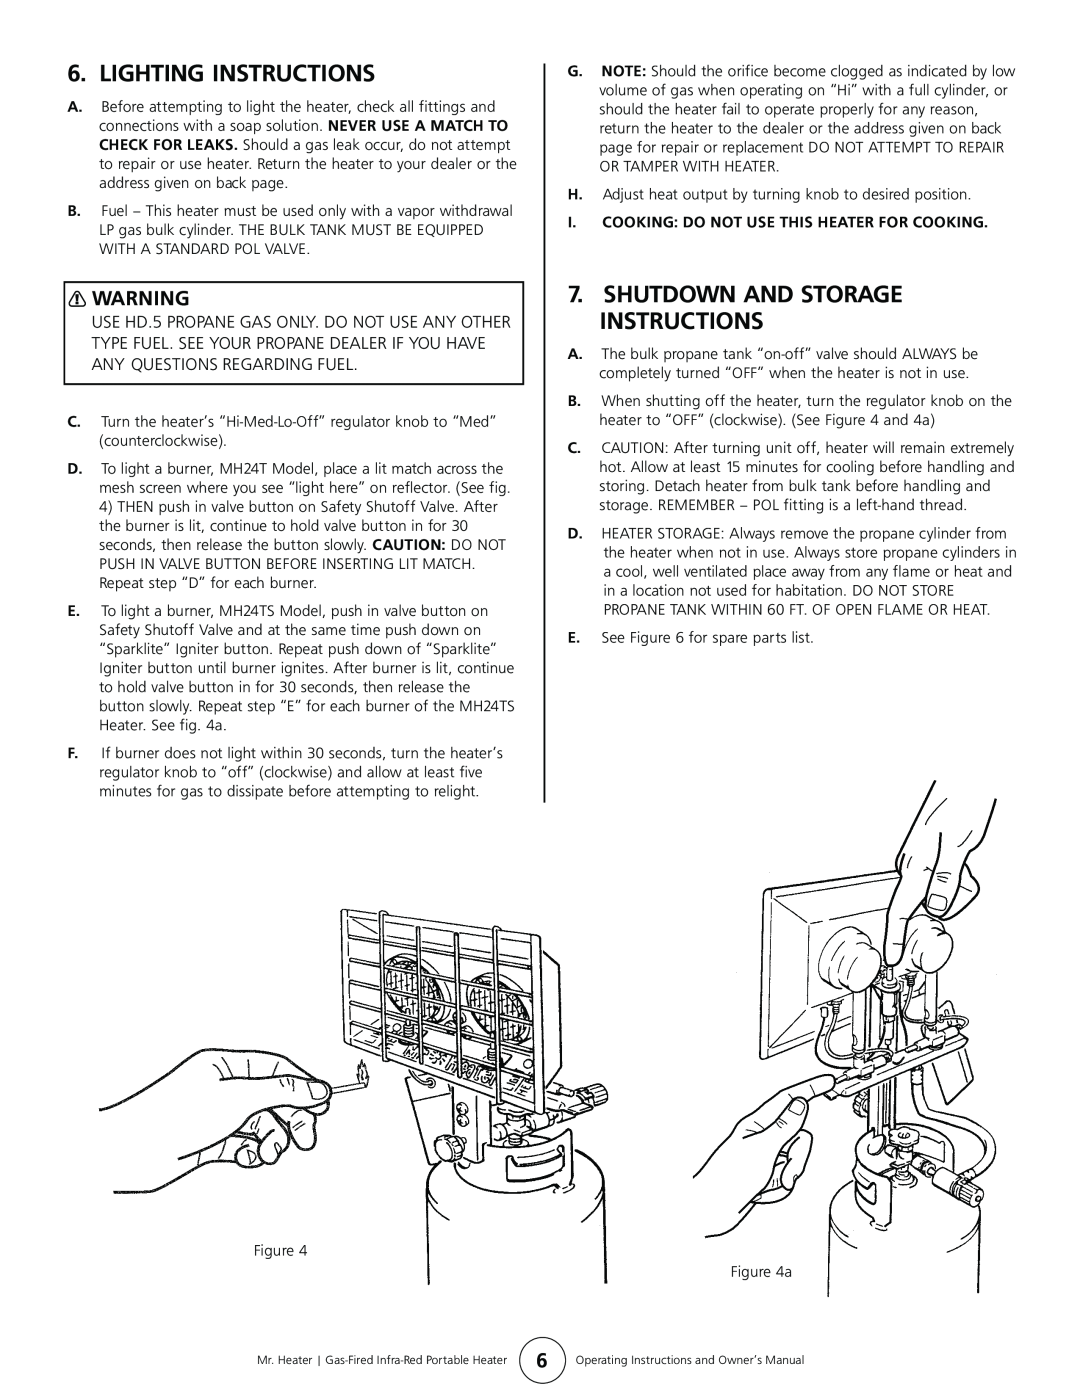 Enerco MH24TS owner manual Lighting Instructions, Shutdown And Storage Instructions 